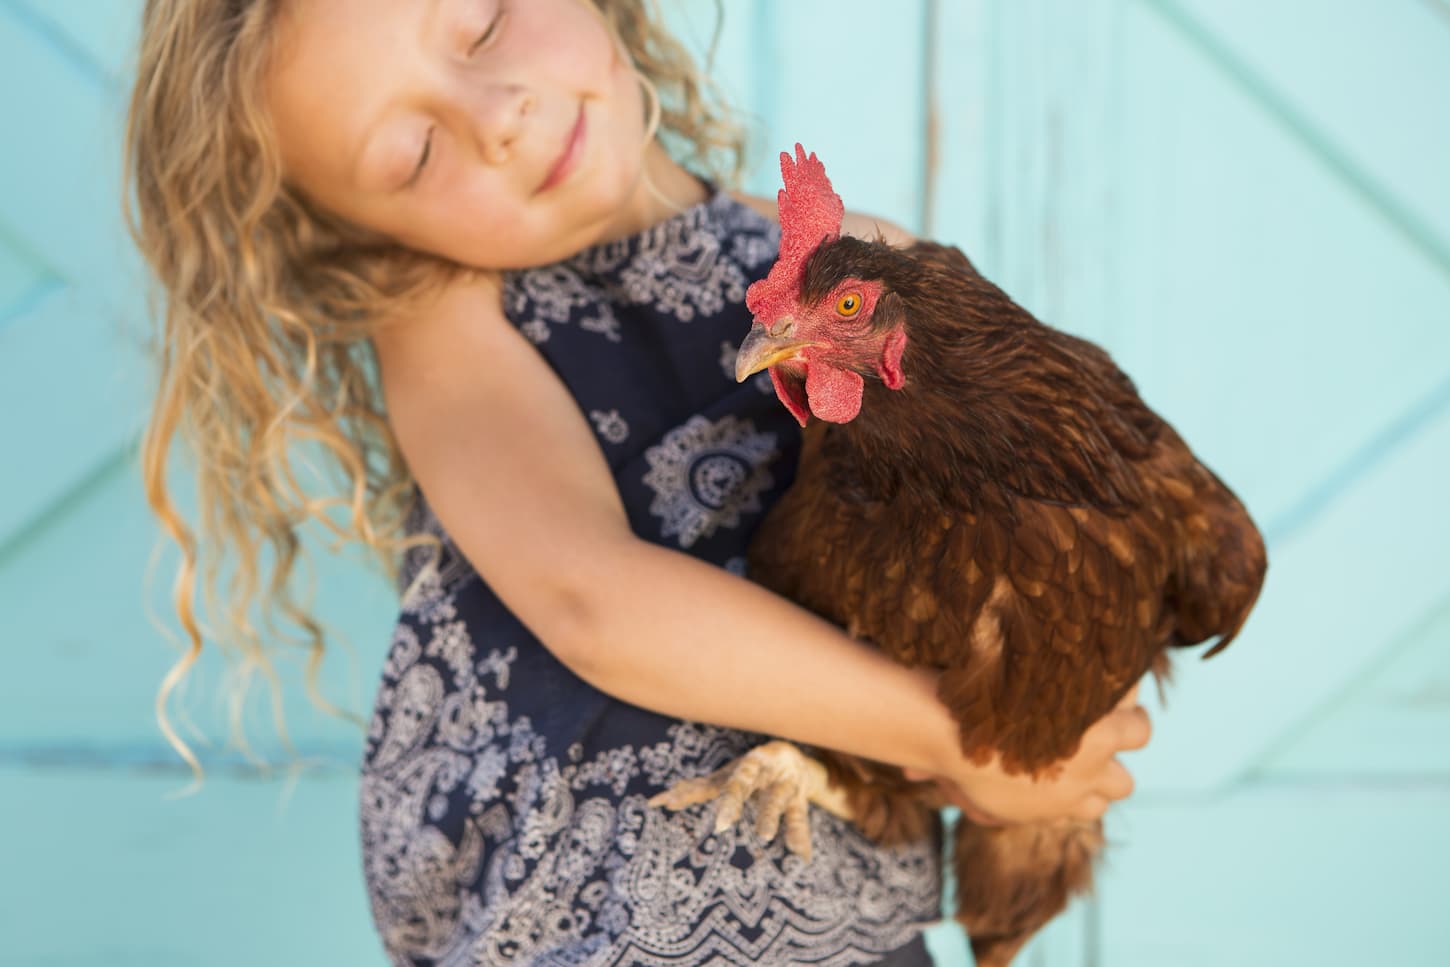 An image of a young girl holding a chicken in her arms.